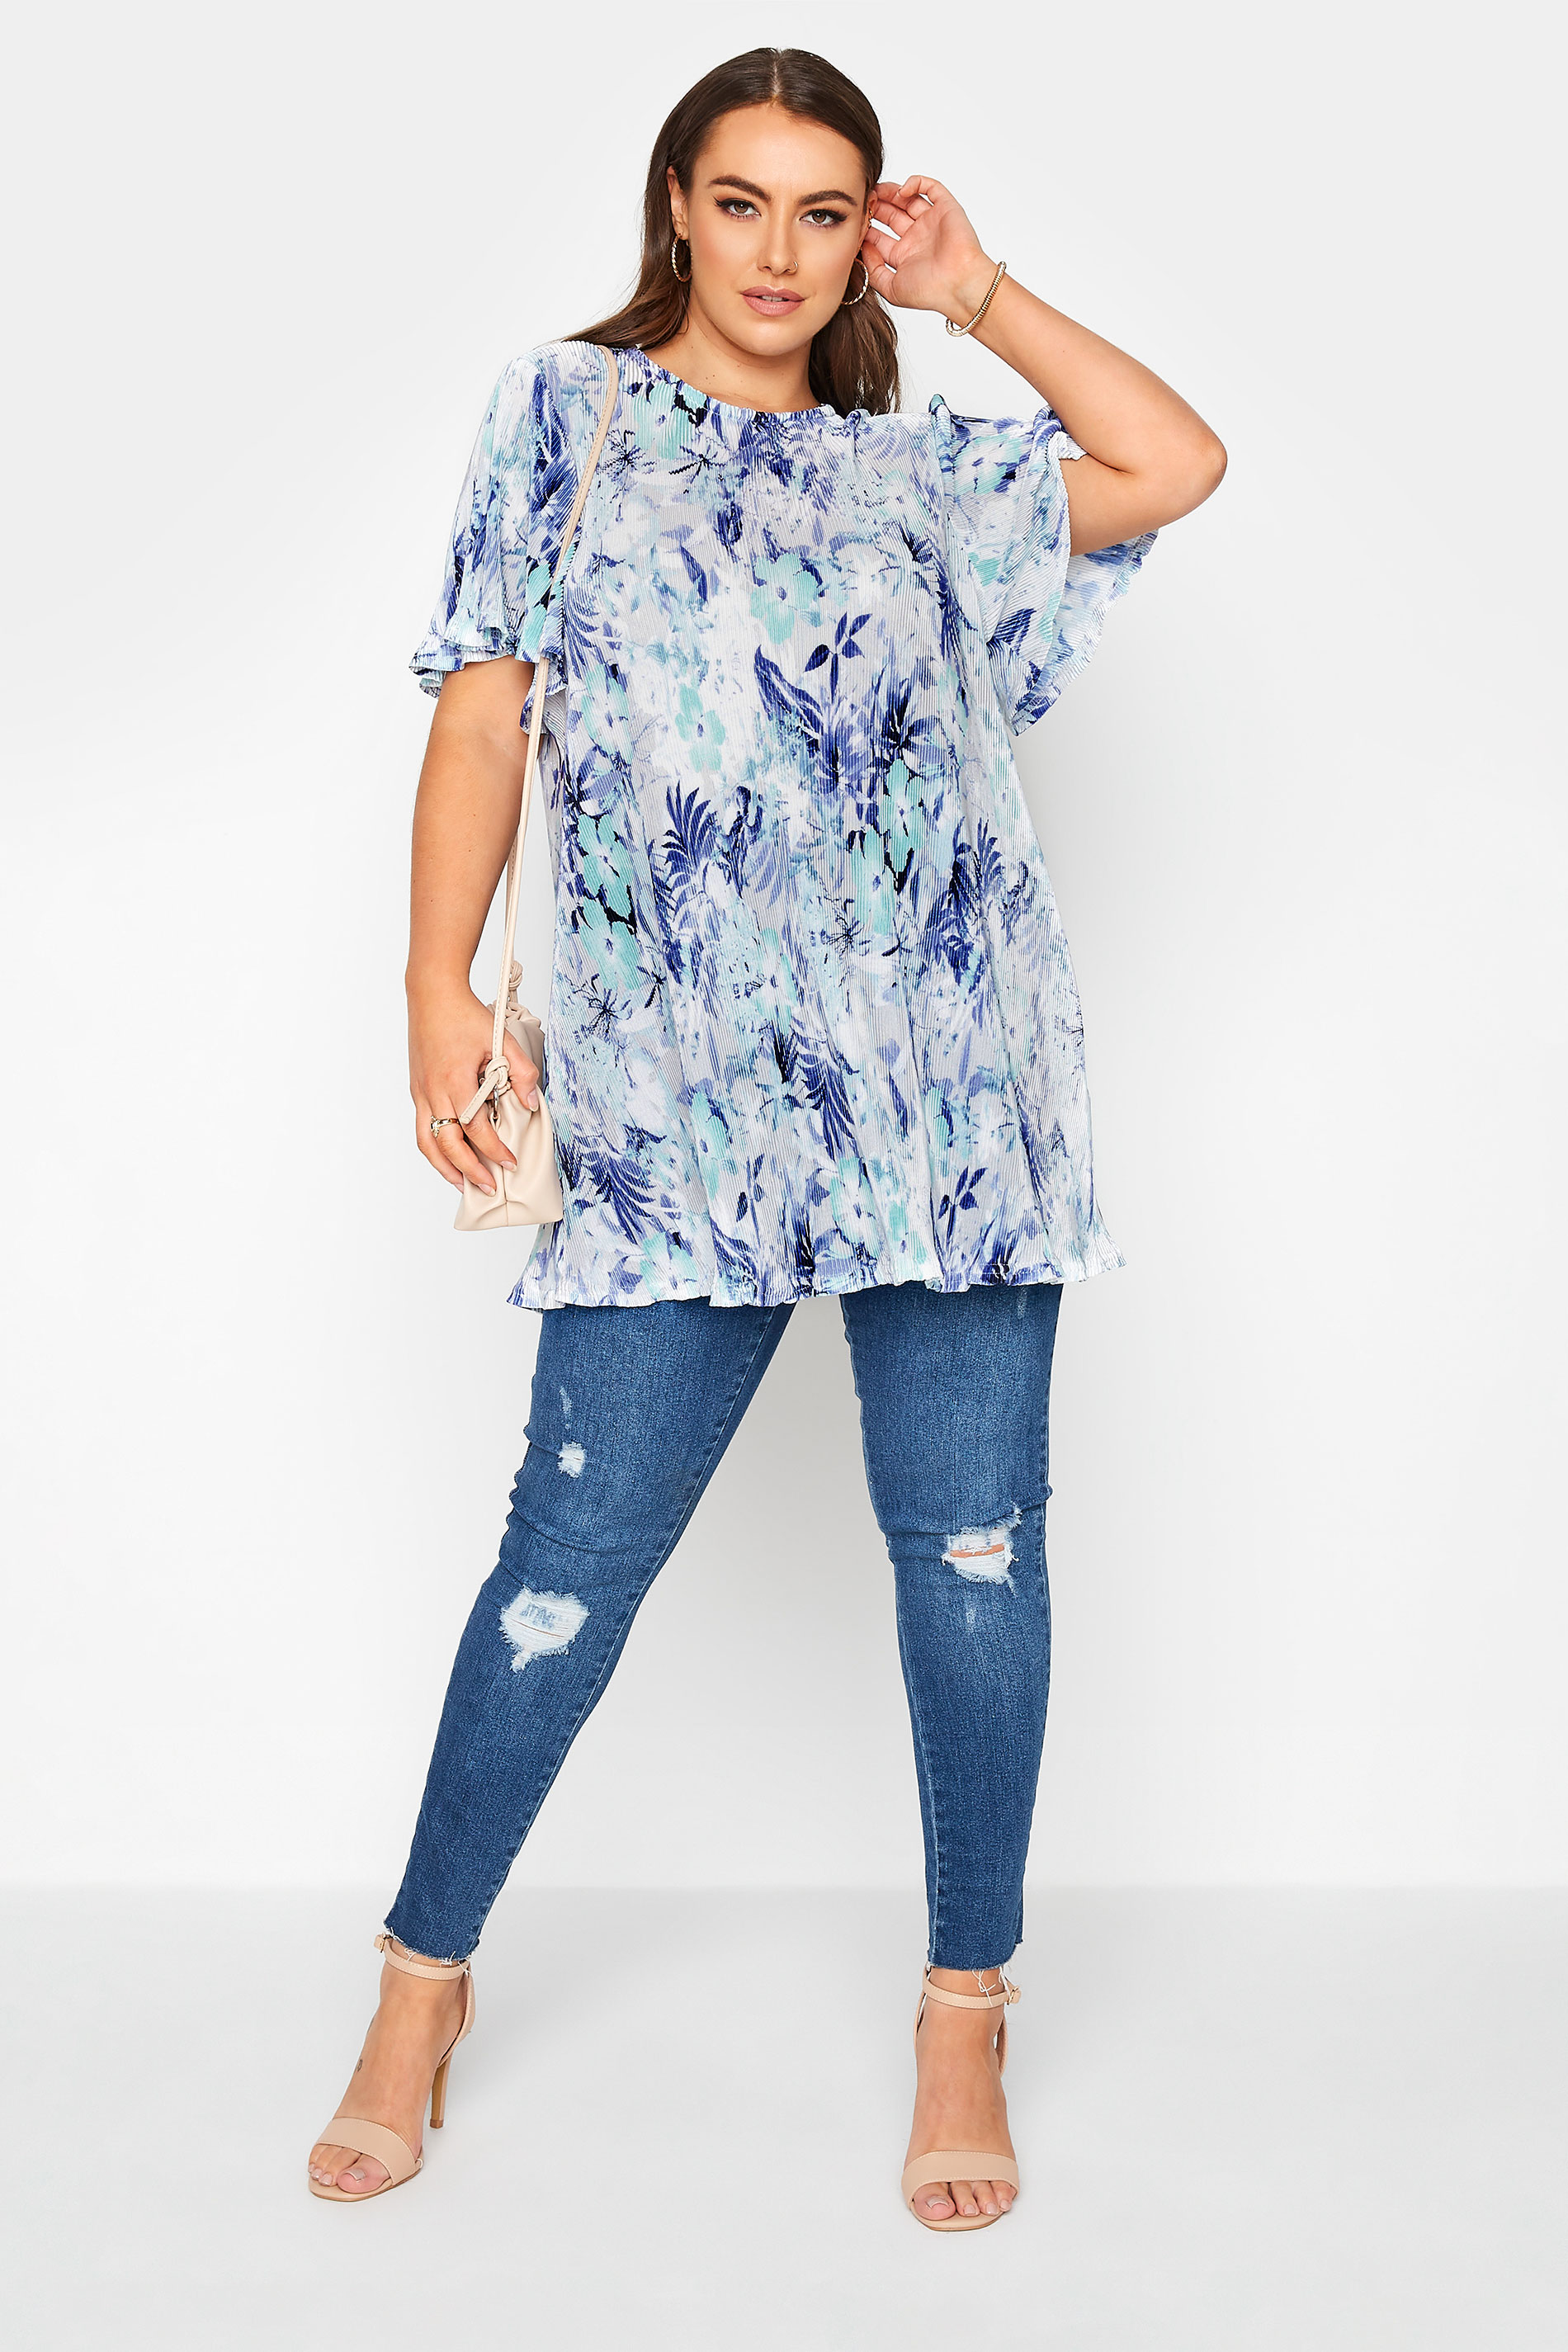 Grande taille  Tops Grande taille  Tops Casual | Top Bleu Ciel Floral Manches Amples - NP20617